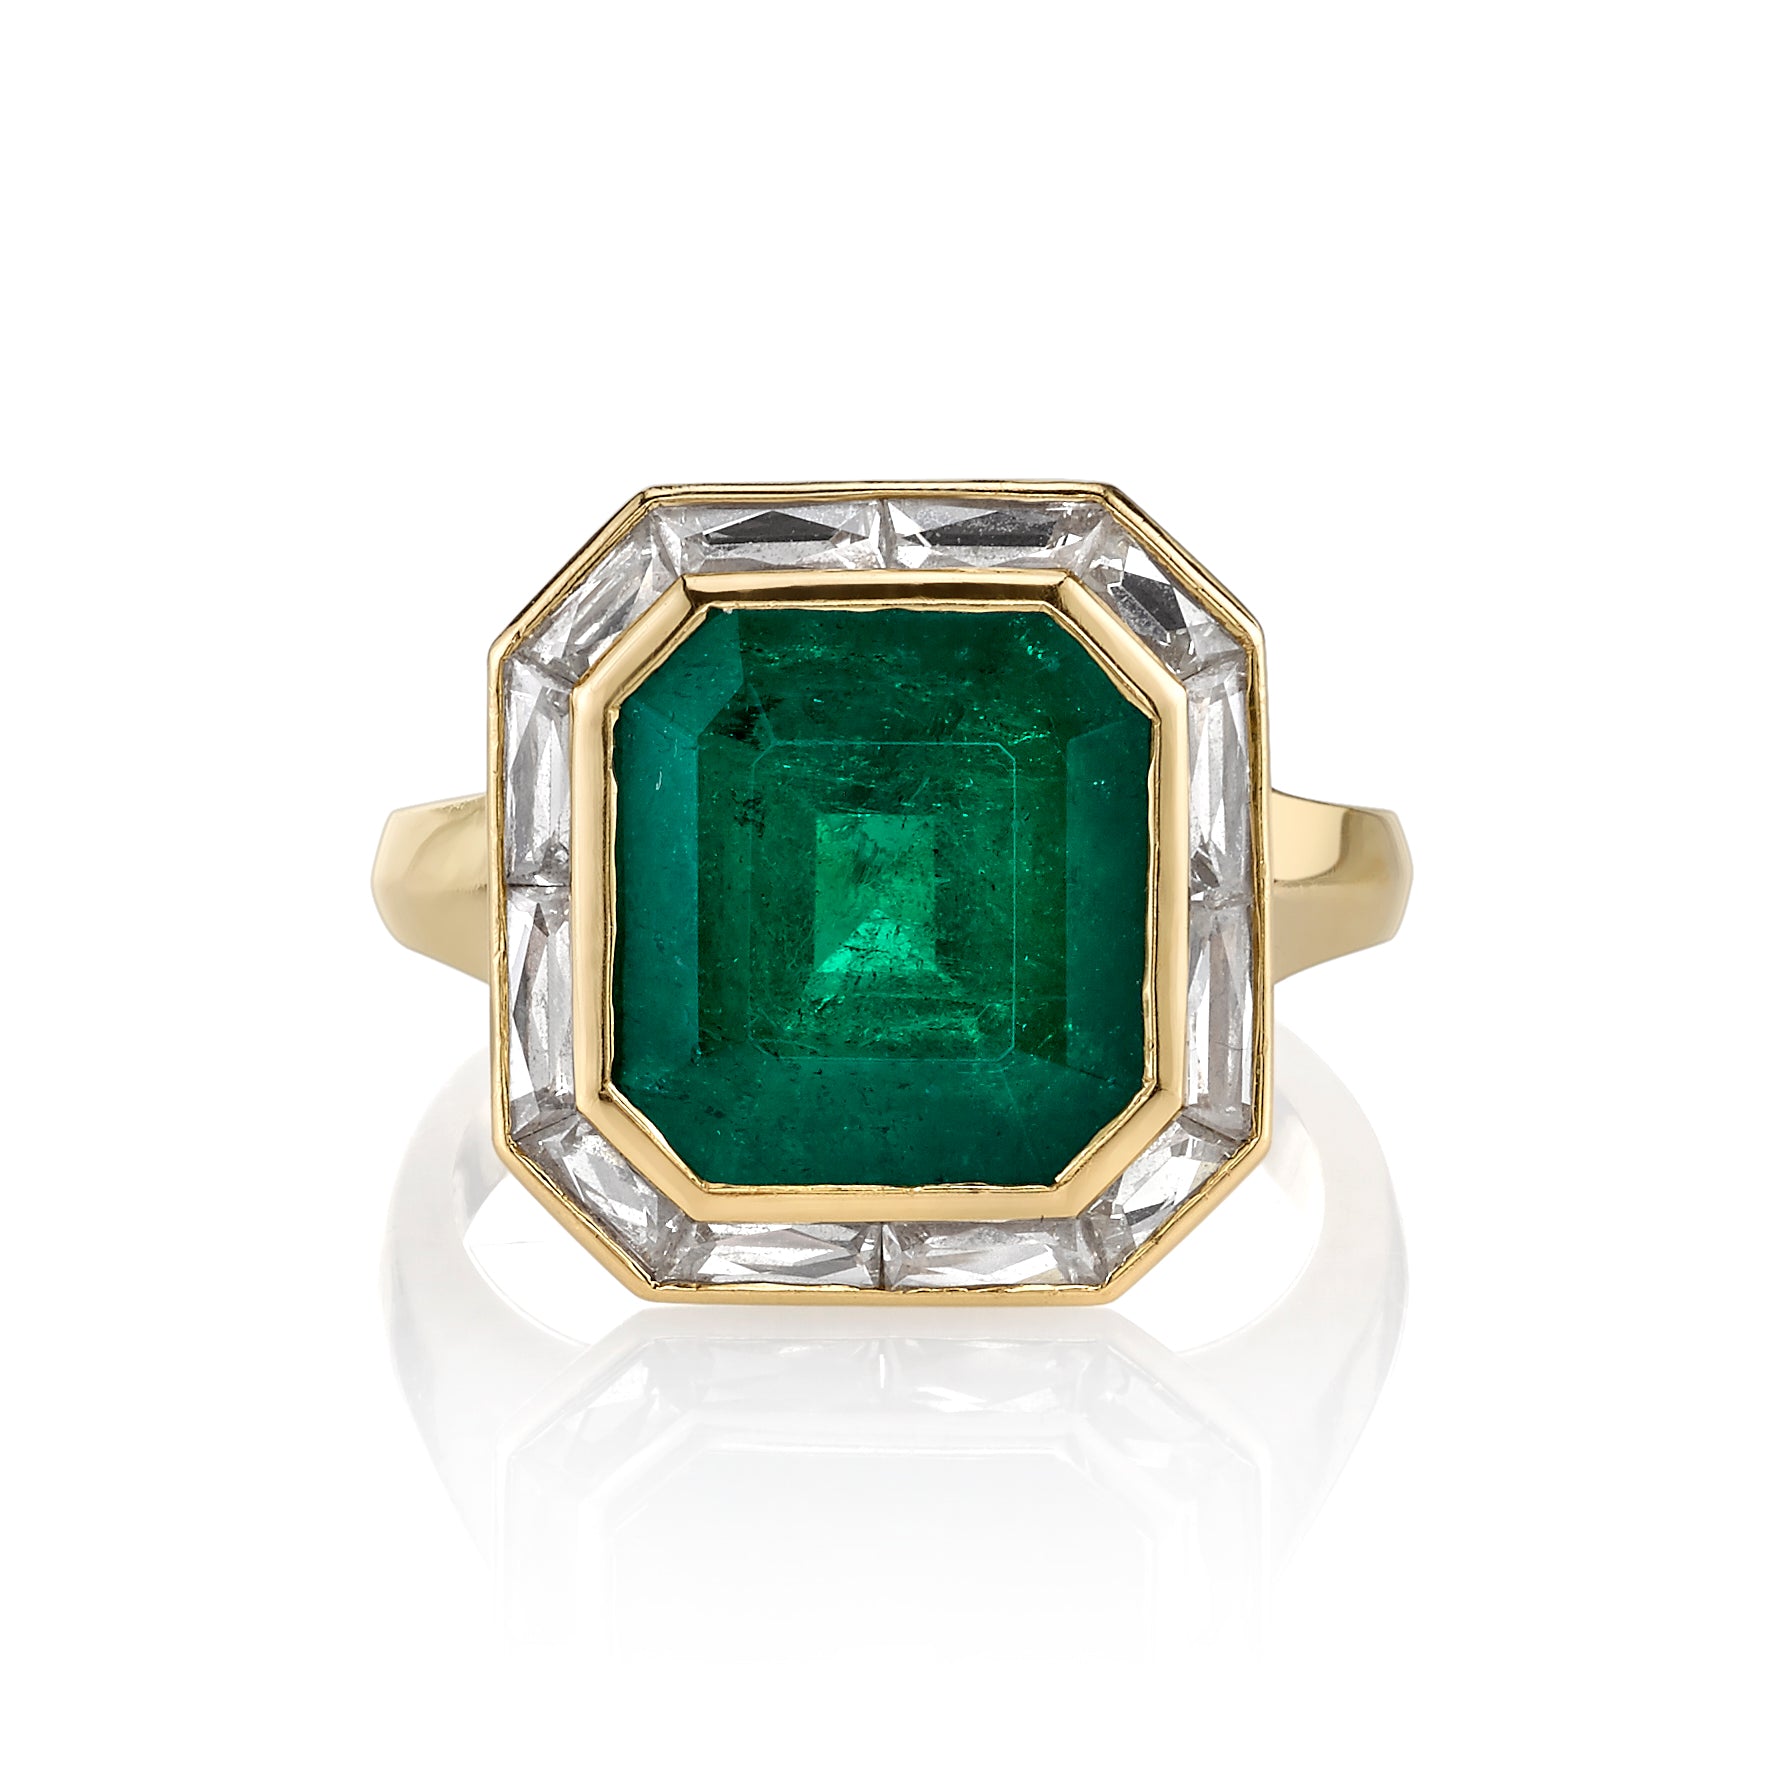 SINGLE STONE MARIA RING featuring 4.61ct cut Colombian emerald surrounded by approximately 1.65ctw French cut baguette accent diamonds set in a handcrafted 18K yellow gold ring.